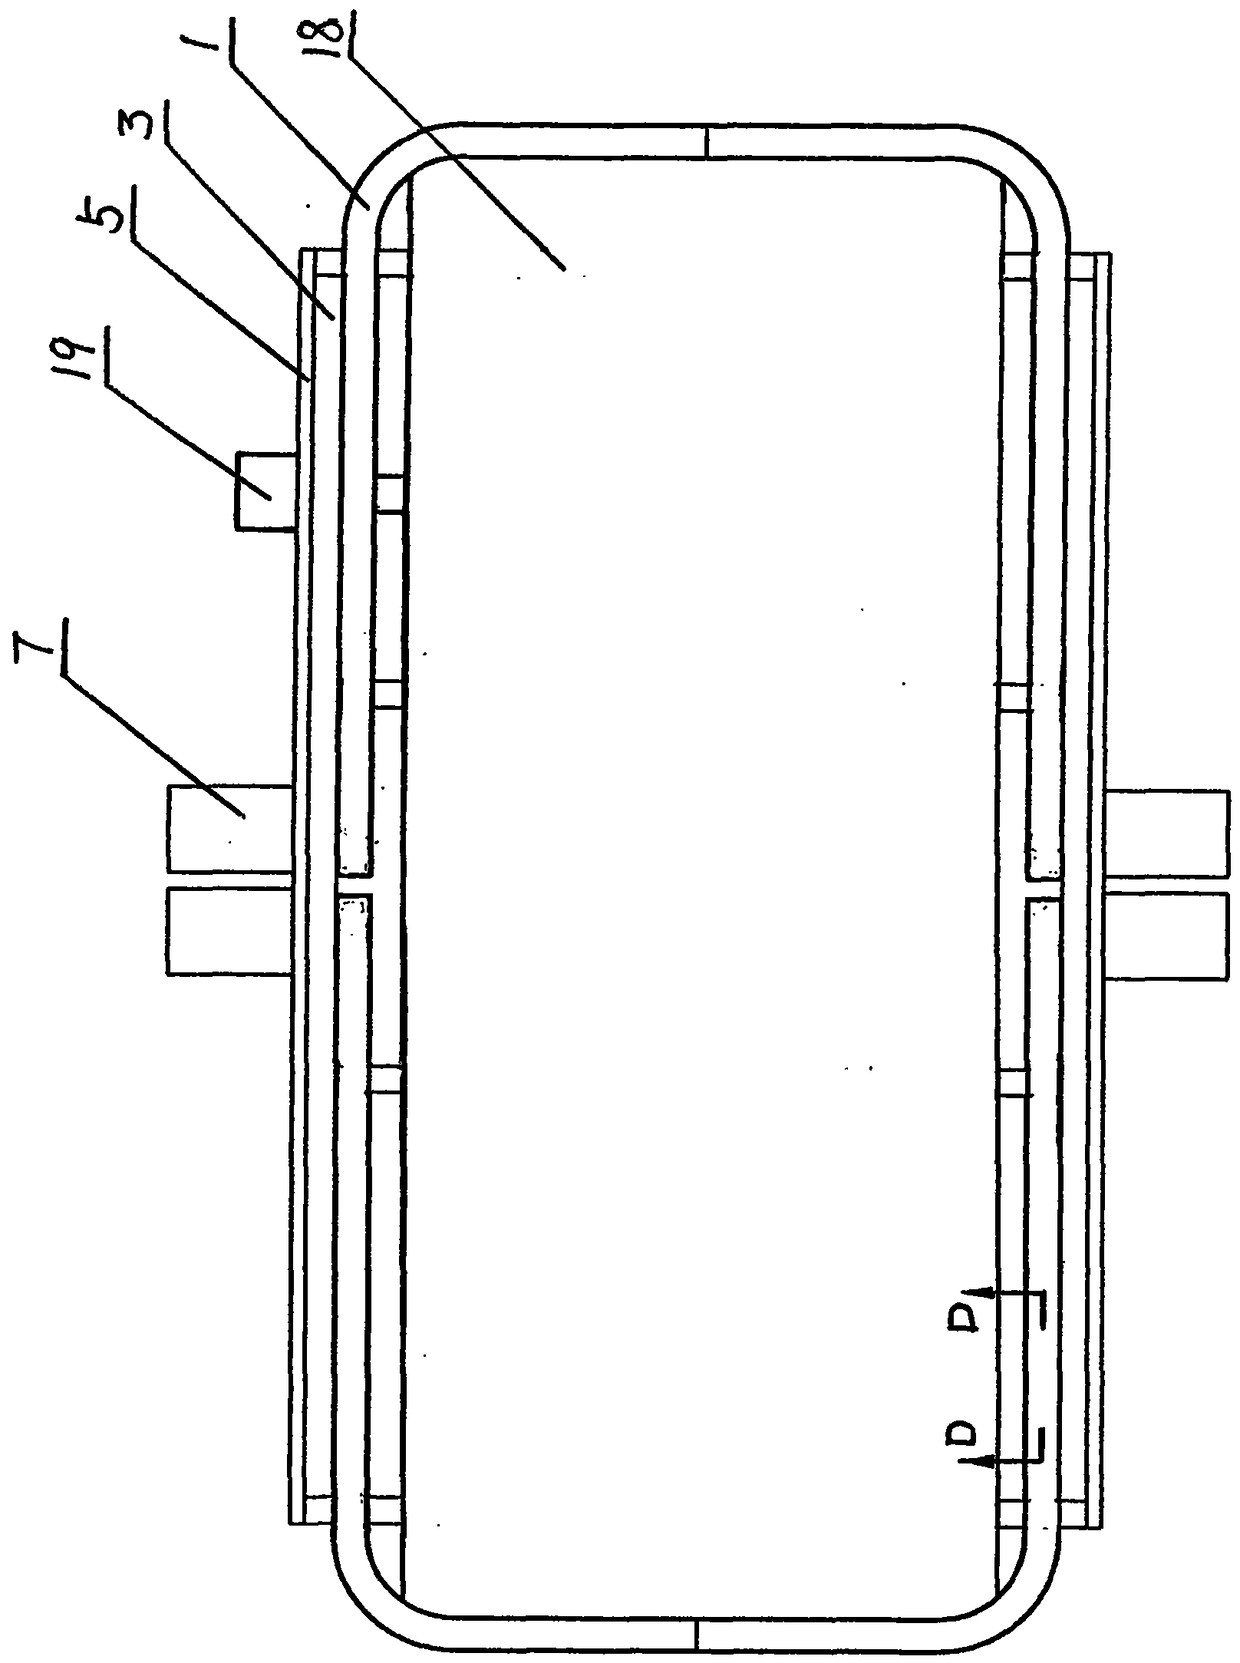 A cold storage delivery door structure